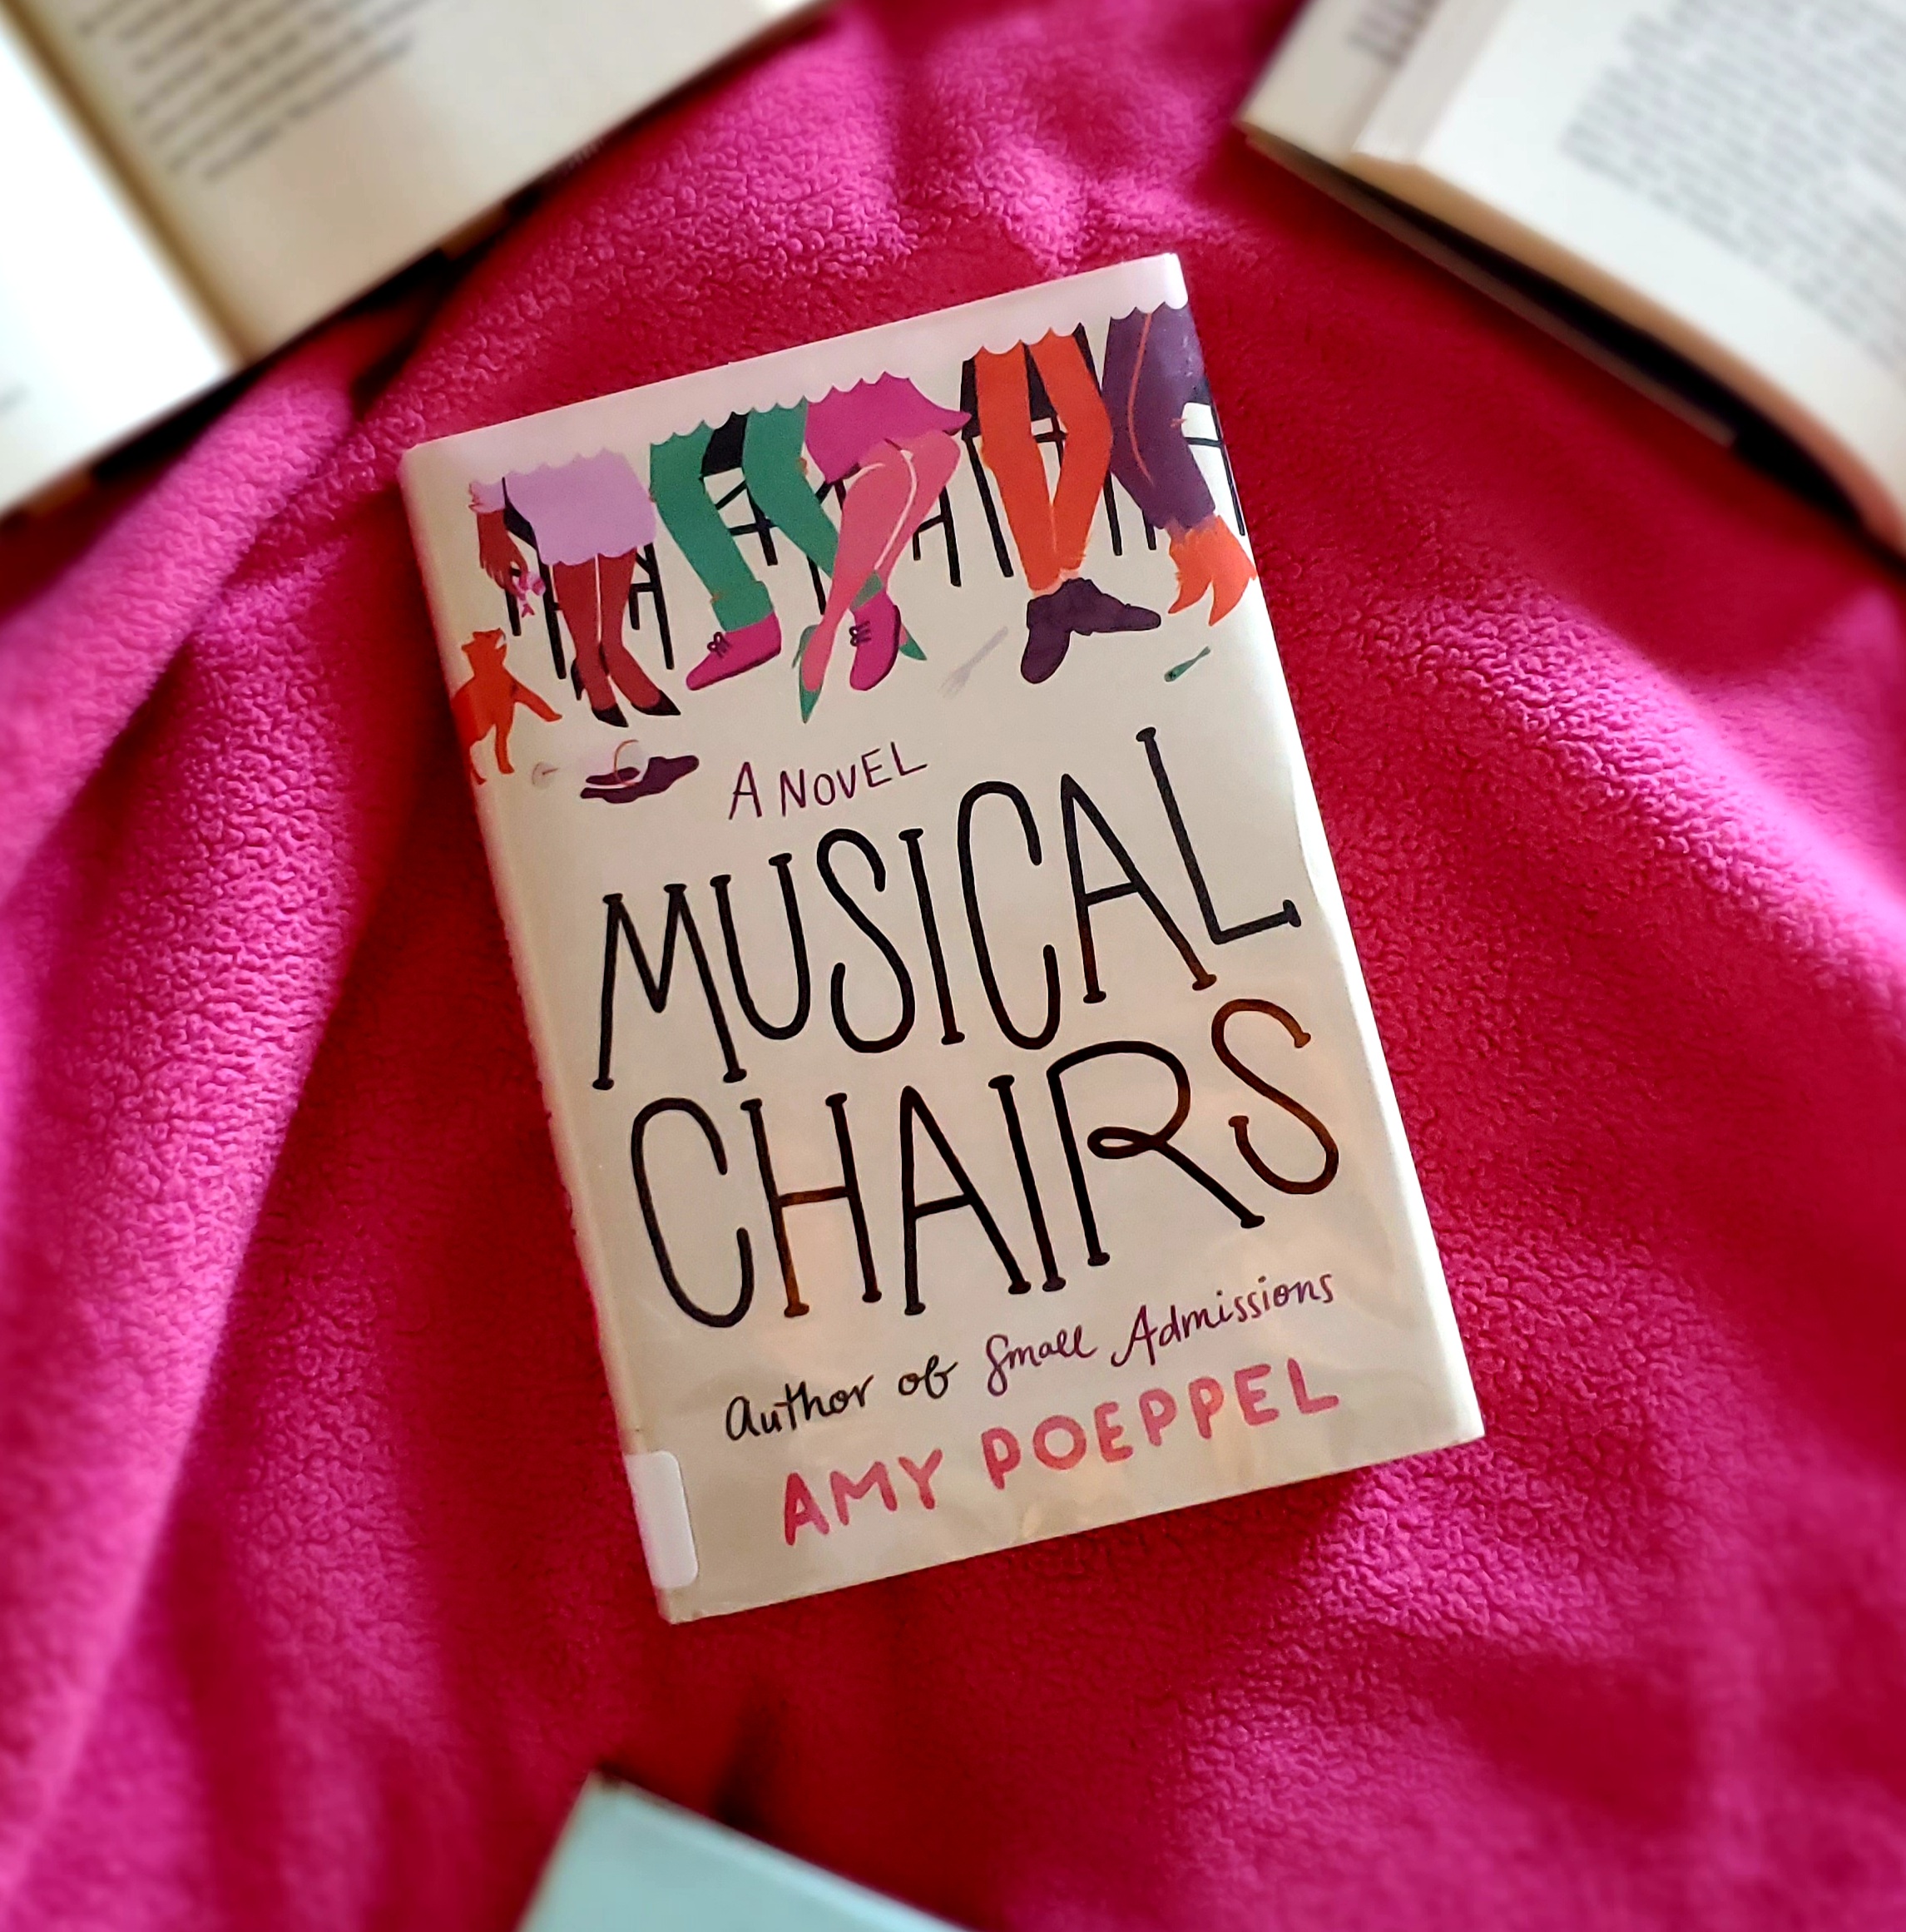 Book Review of MUSICAL CHAIRS